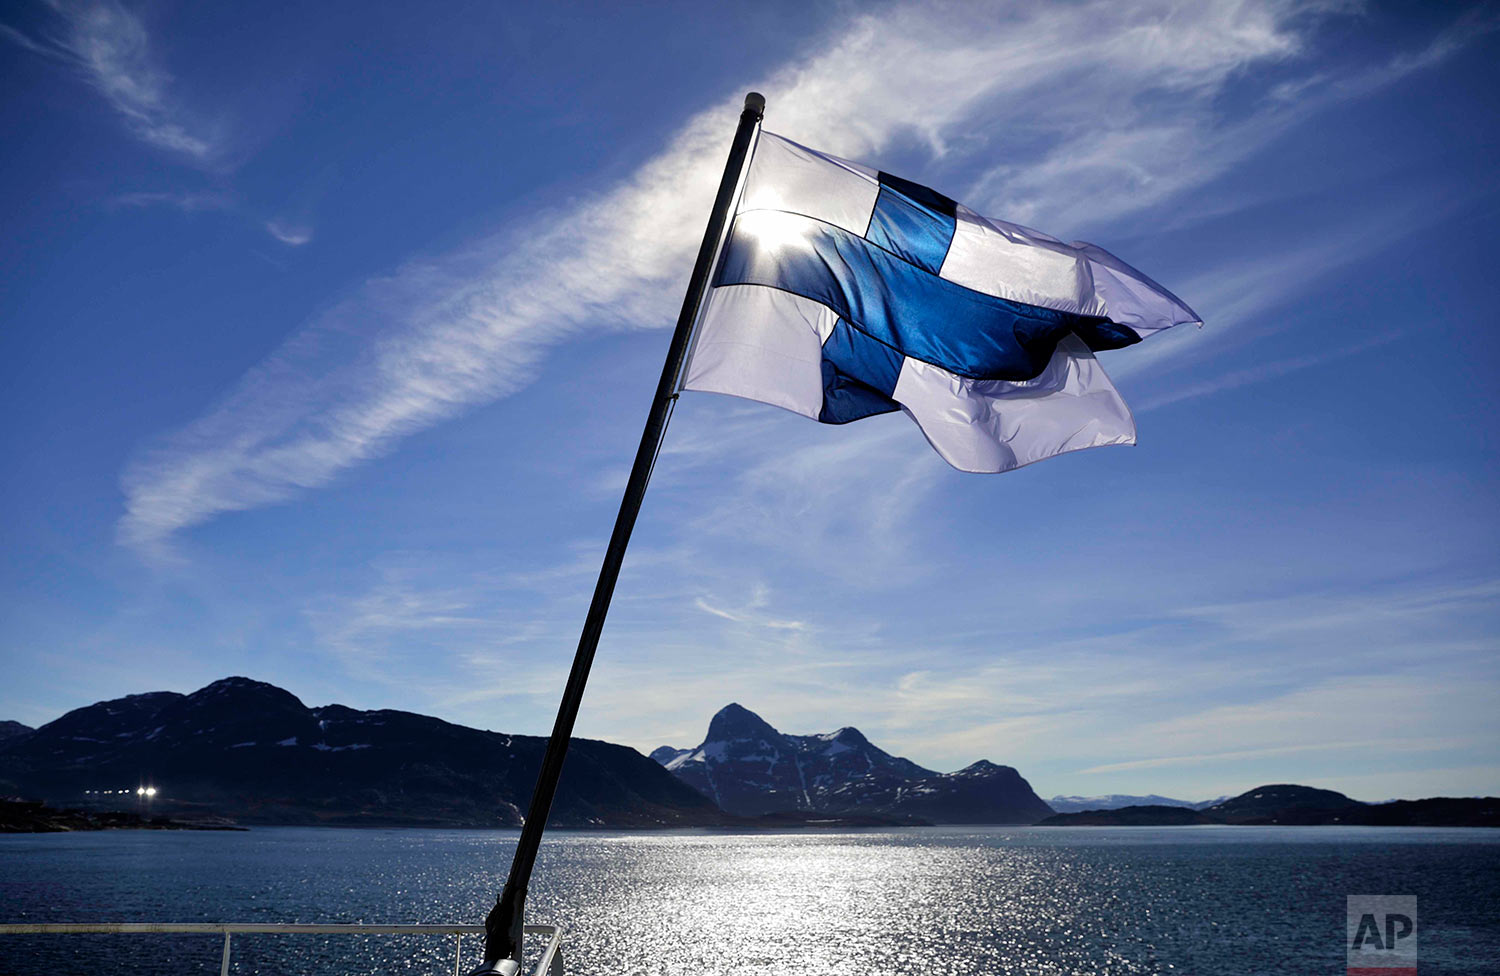  The flag of Finland flies aboard the Finnish icebreaker MSV Nordica as it arrives into Nuuk, Greenland, after traversing the Northwest Passage through the Canadian Arctic Archipelago, Saturday, July 29, 2017. After 24 days at sea and a journey spann